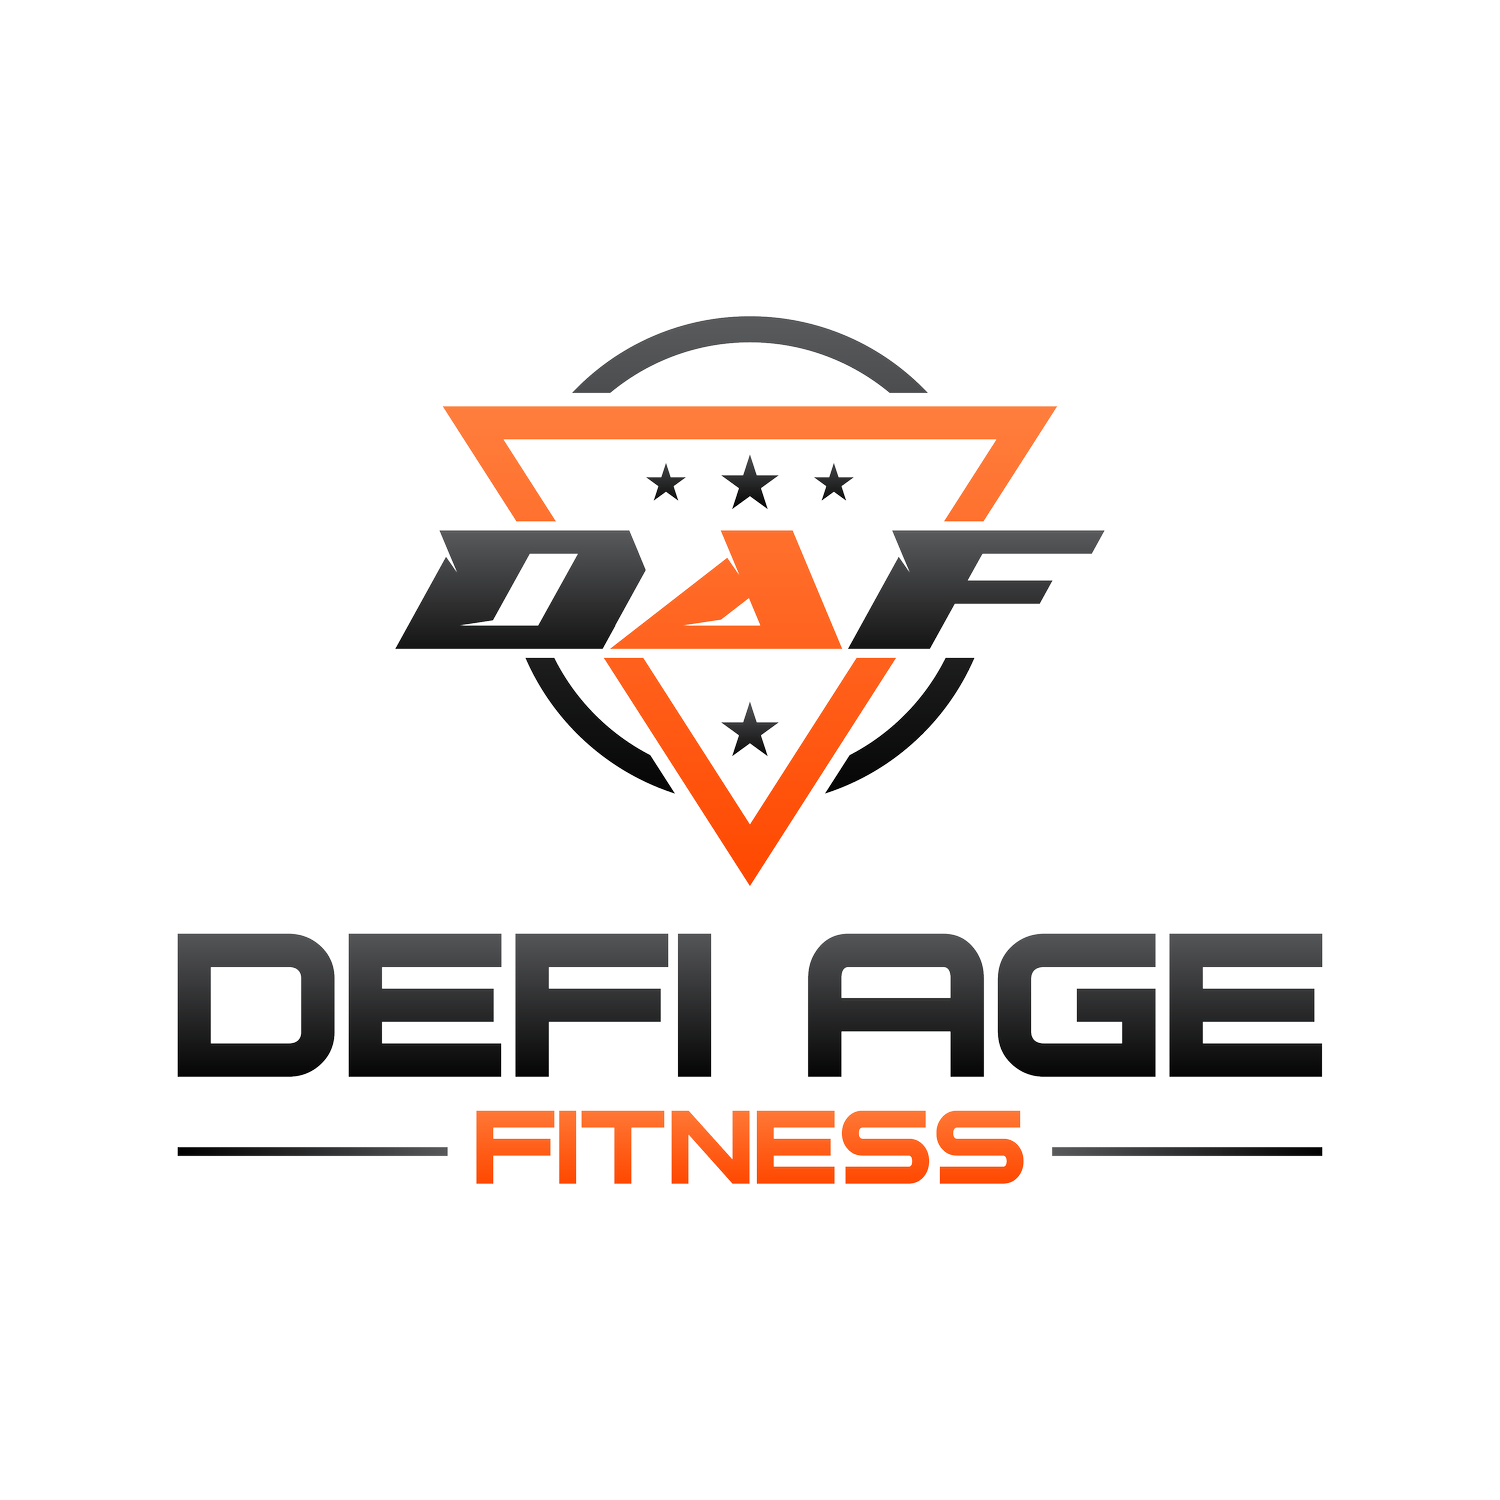 Defi-Age Fitness | Personal Training Wickliffe, Willoughby and Euclid Ohio | Roderick Sims 